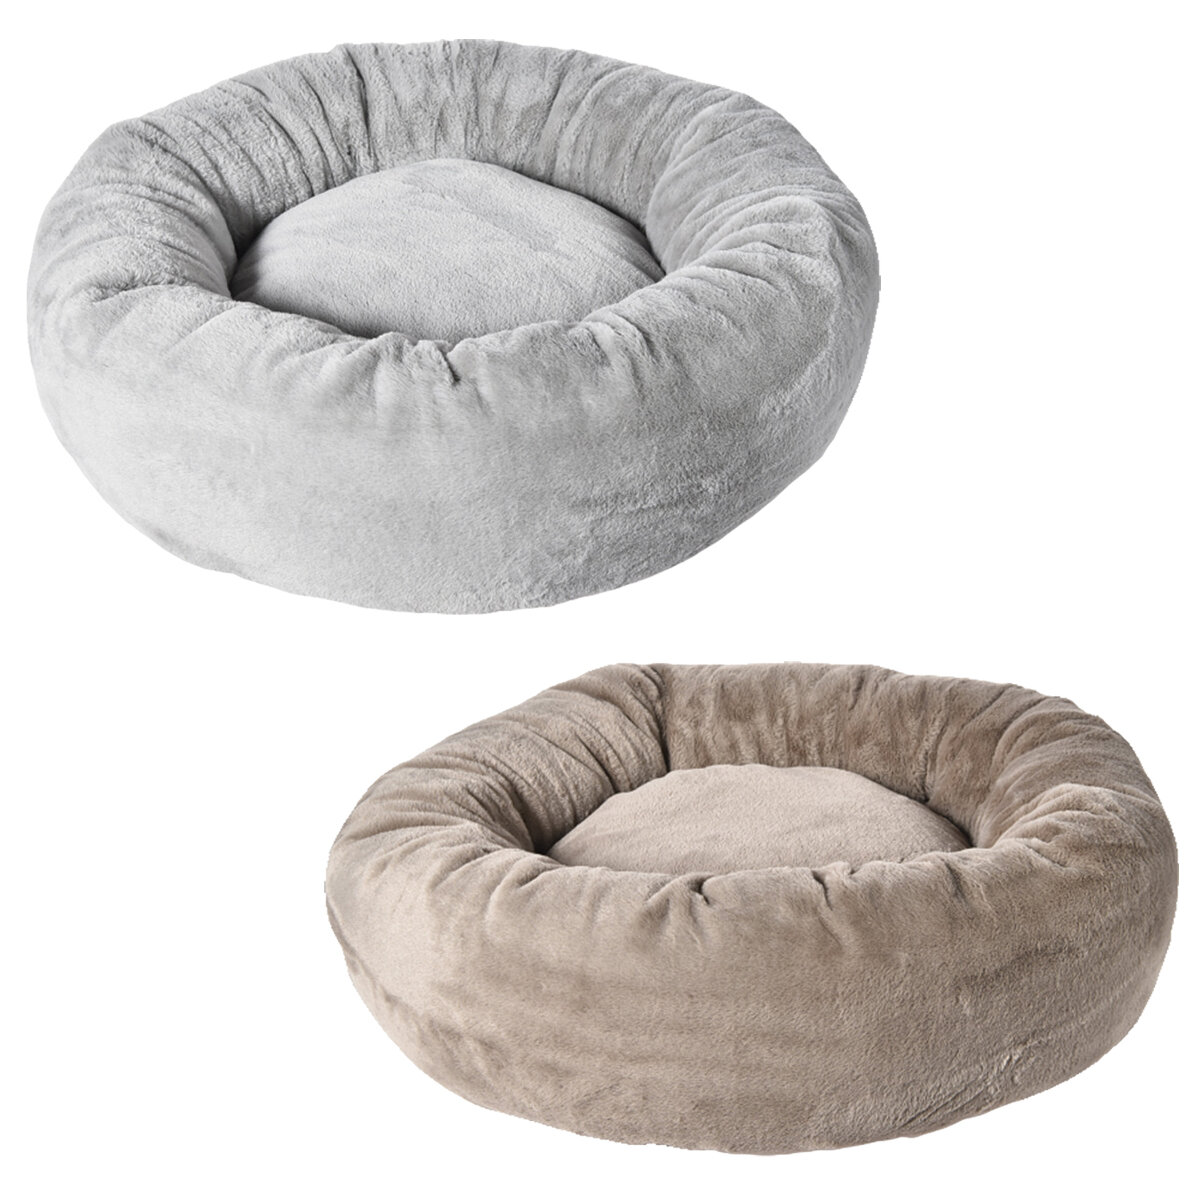 Mighty Paws Oval Faux Fur Pet Bed, 75cm x 24cm, in 2 Colours